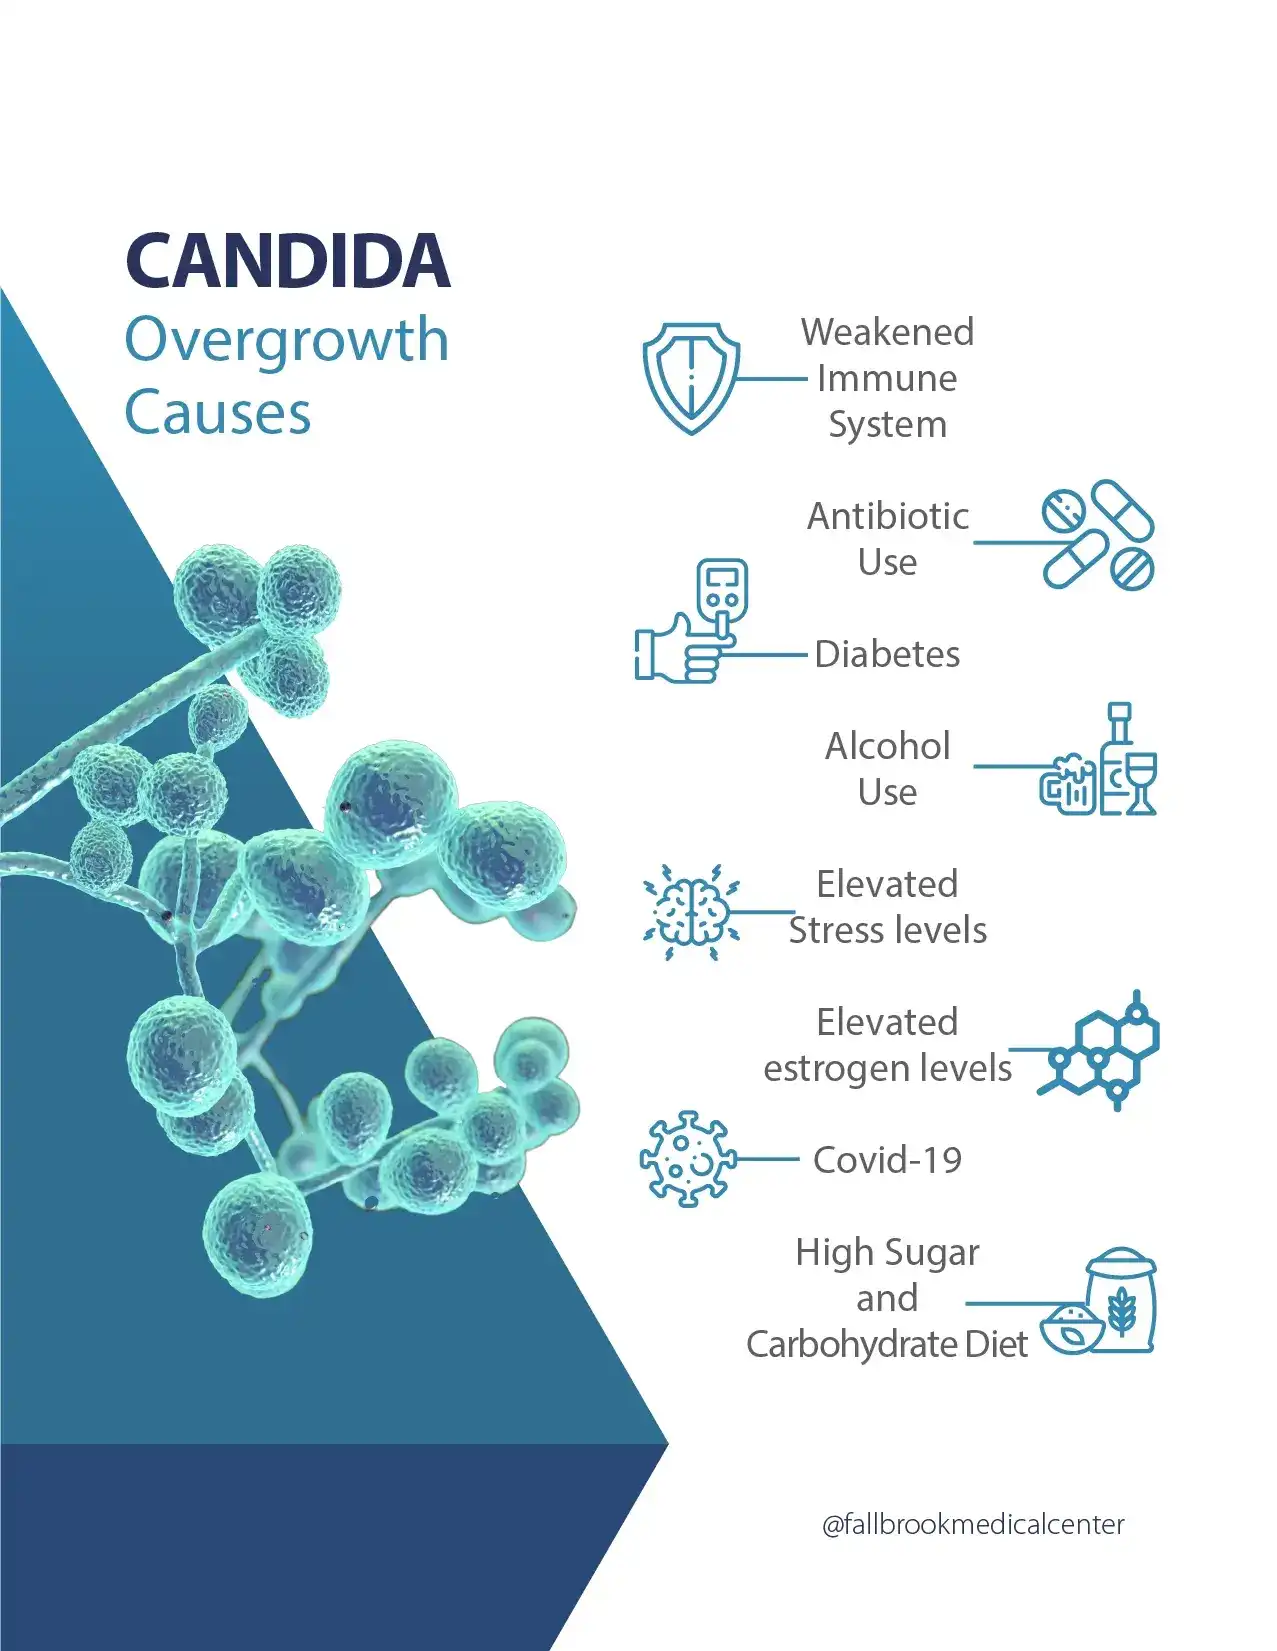 The overgrowth of the Candida albicans fungus causes this issue